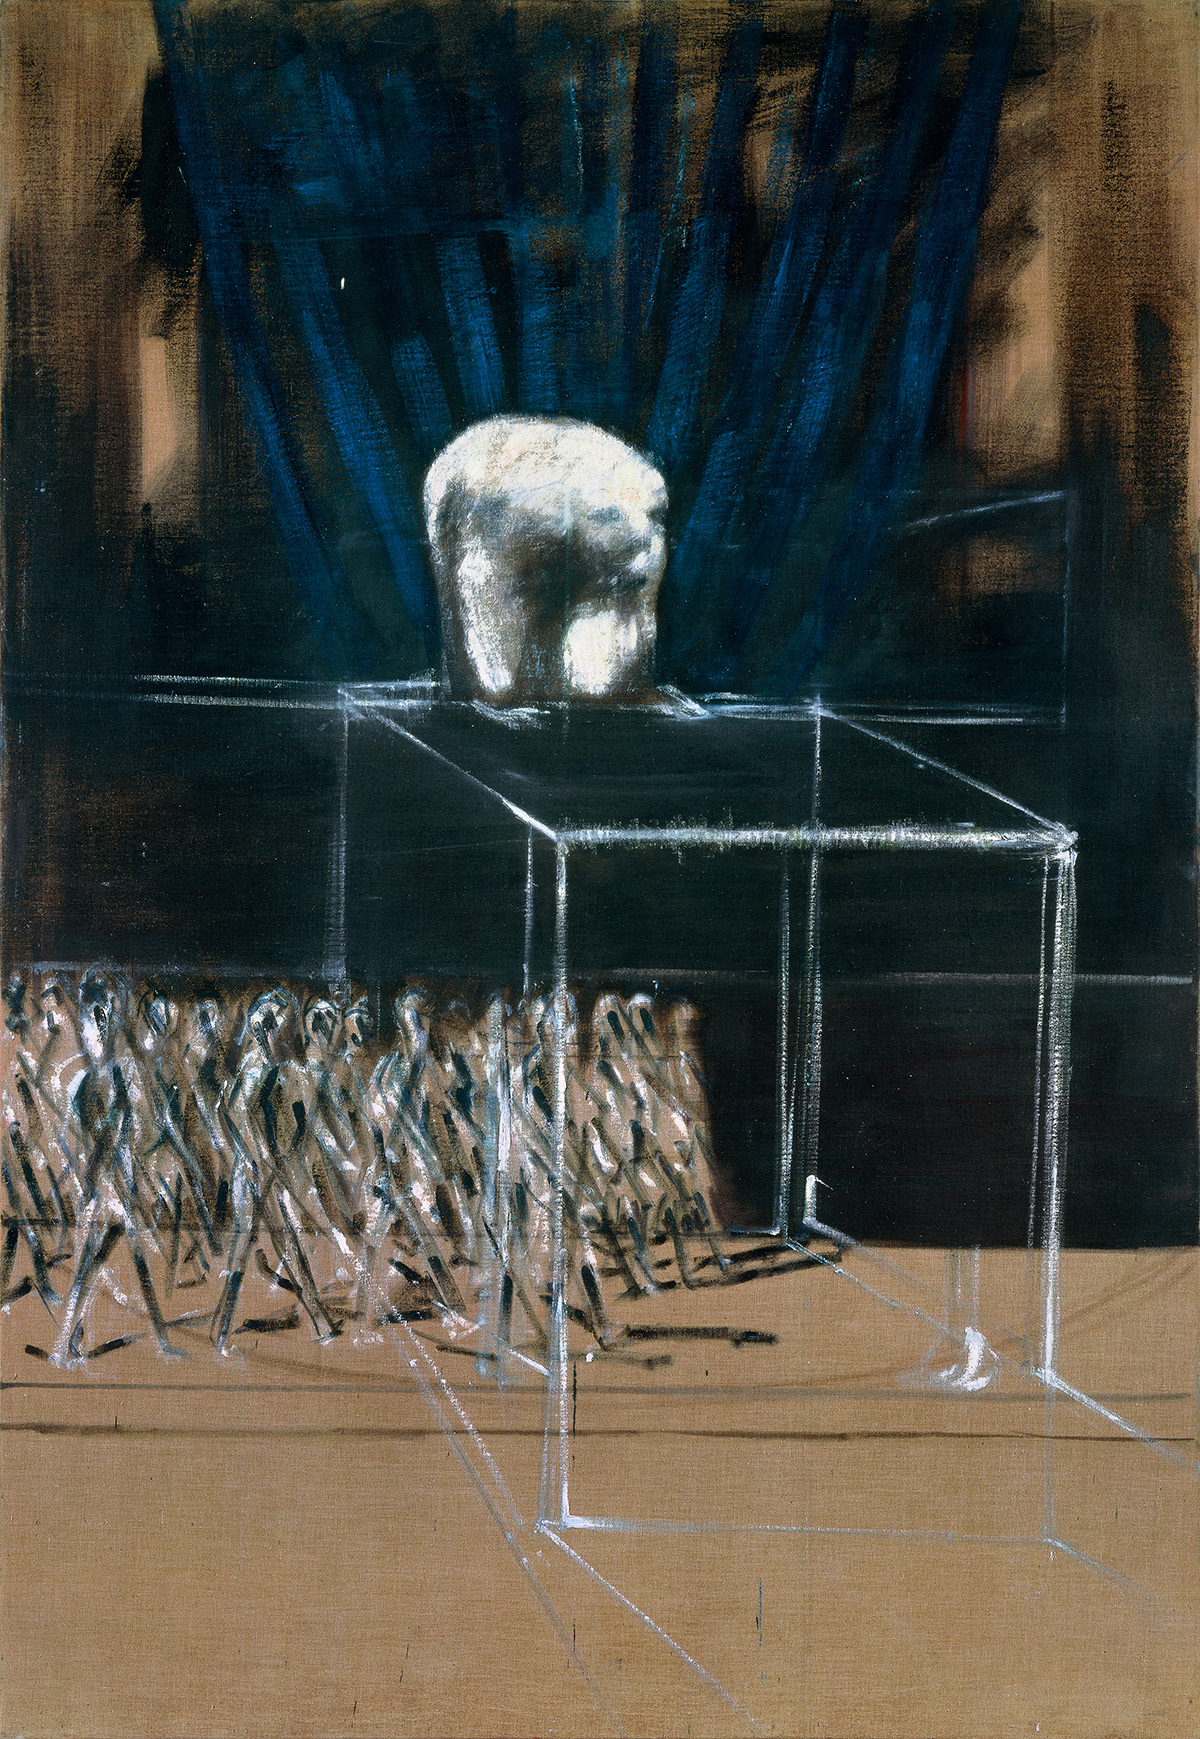 Francis Bacon, ‘Marching Figures’, 1952. Oil on canvas. CR number 52-22. © The Estate of Francis Bacon / DACS London 2020. All rights reserved.